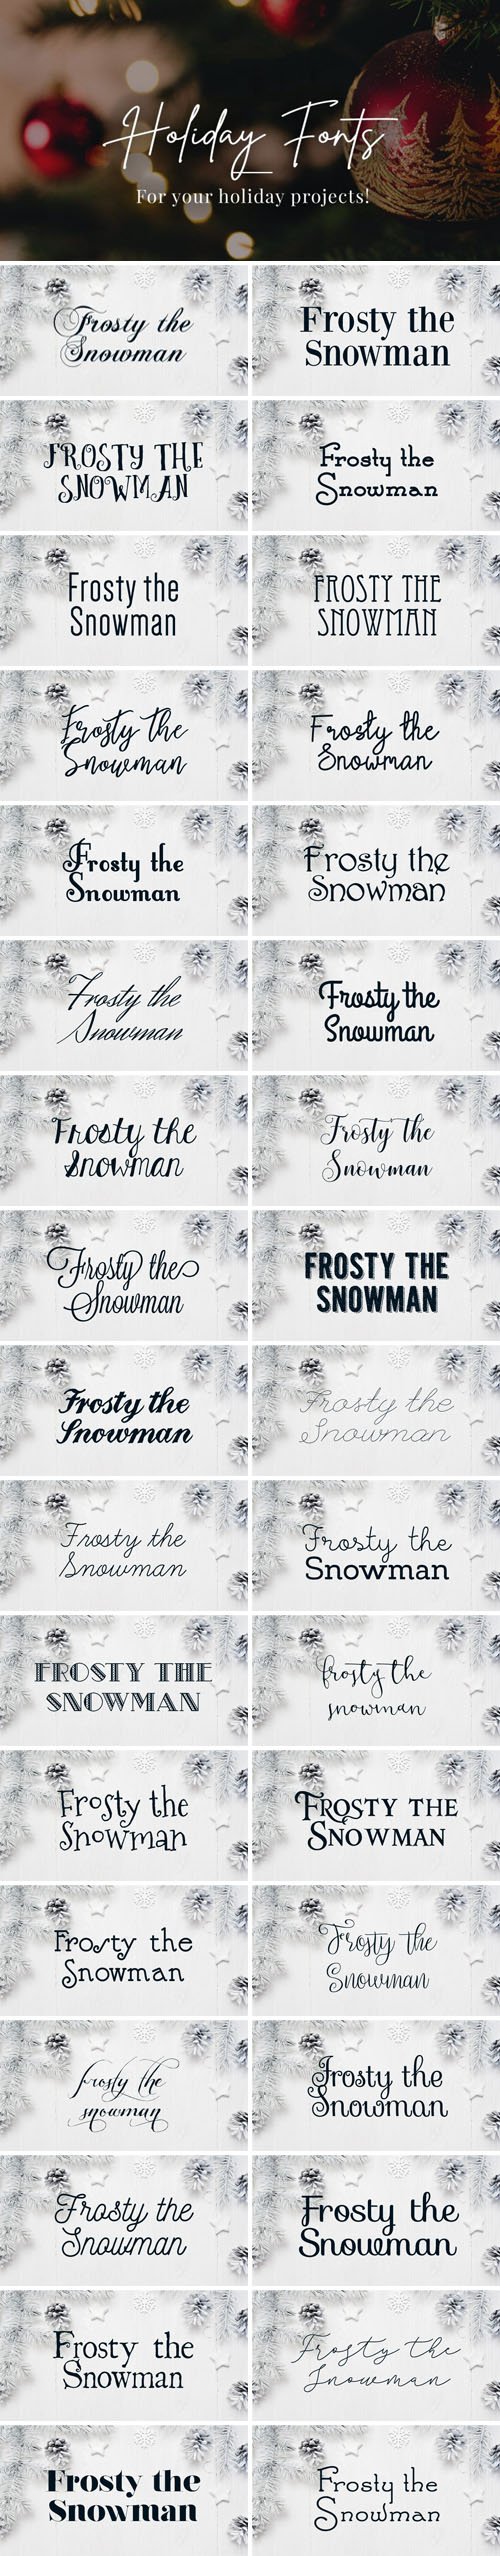 30+ Festive Fonts Pack for Holiday Projects